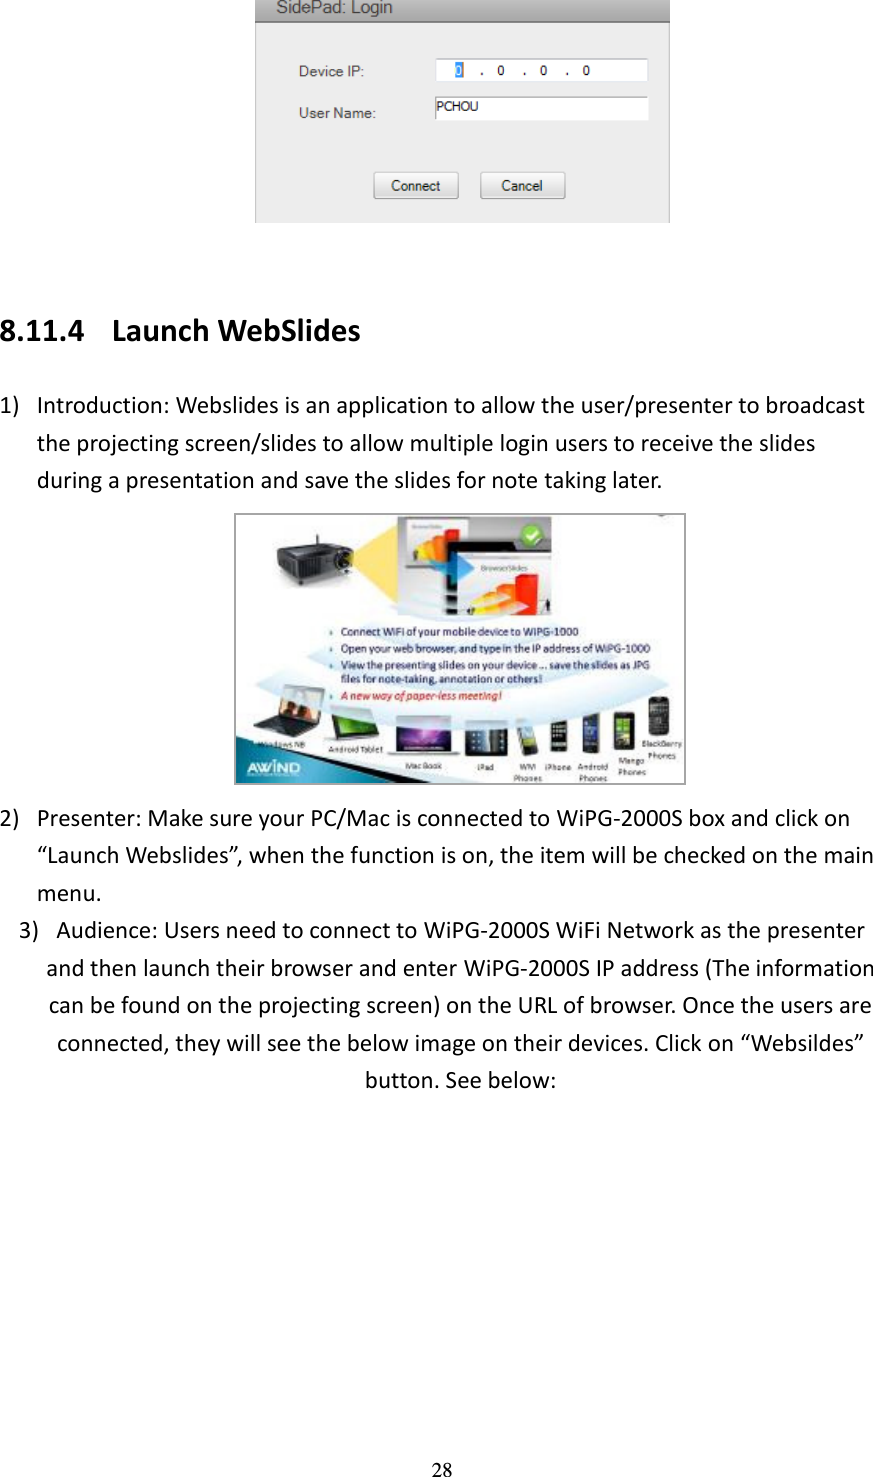   28   8.11.4 Launch WebSlides 1) Introduction: Webslides is an application to allow the user/presenter to broadcast the projecting screen/slides to allow multiple login users to receive the slides during a presentation and save the slides for note taking later.    2) Presenter: Make sure your PC/Mac is connected to WiPG-2000S box and click on “Launch Webslides”, when the function is on, the item will be checked on the main menu.   3) Audience: Users need to connect to WiPG-2000S WiFi Network as the presenter and then launch their browser and enter WiPG-2000S IP address (The information can be found on the projecting screen) on the URL of browser. Once the users are connected, they will see the below image on their devices. Click on “Websildes” button. See below: 